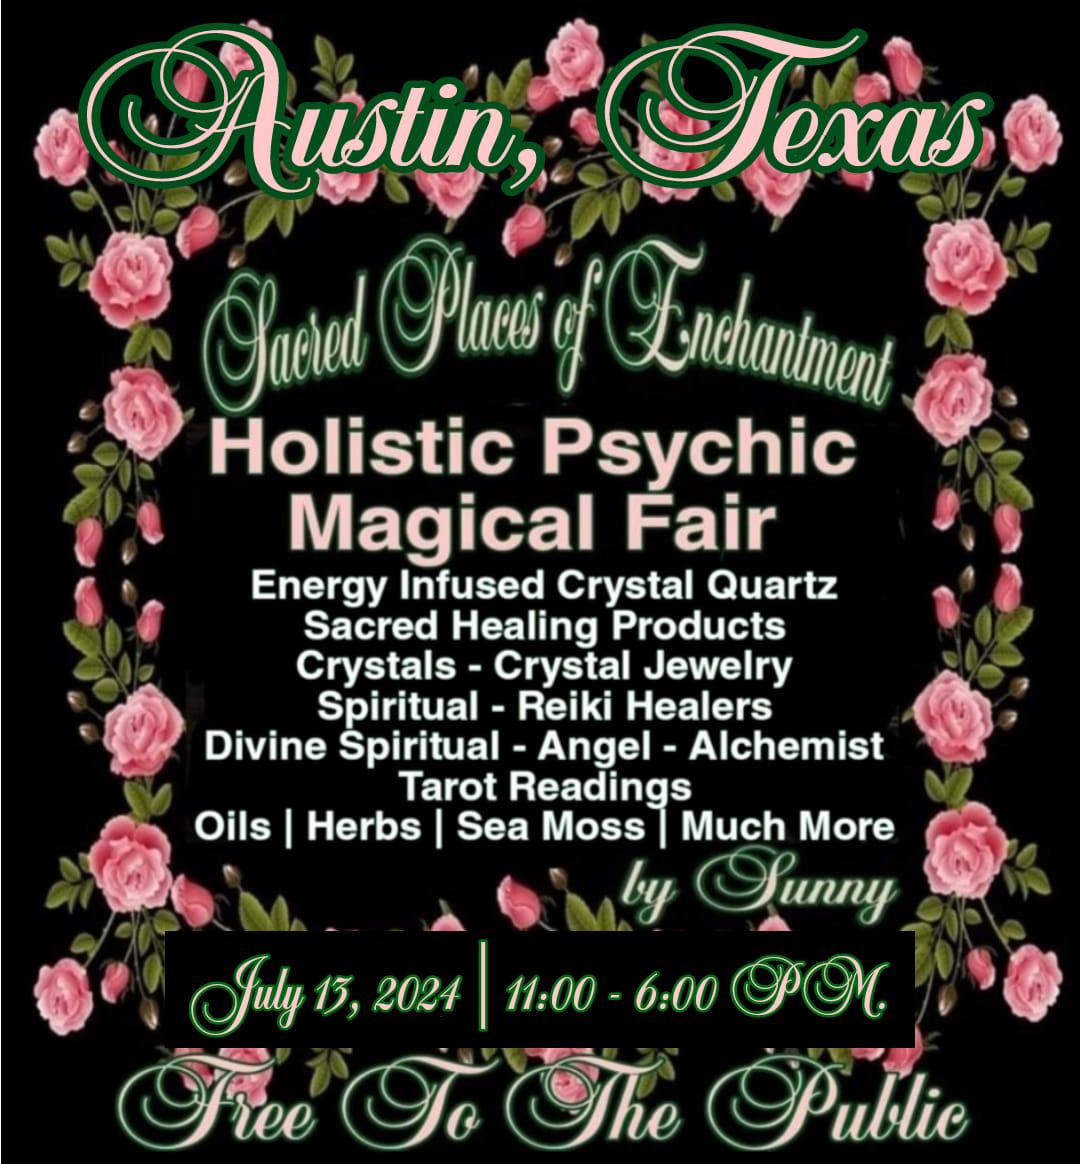 Sacred Places of Enchantment Holistic Psychic Magical Fair 